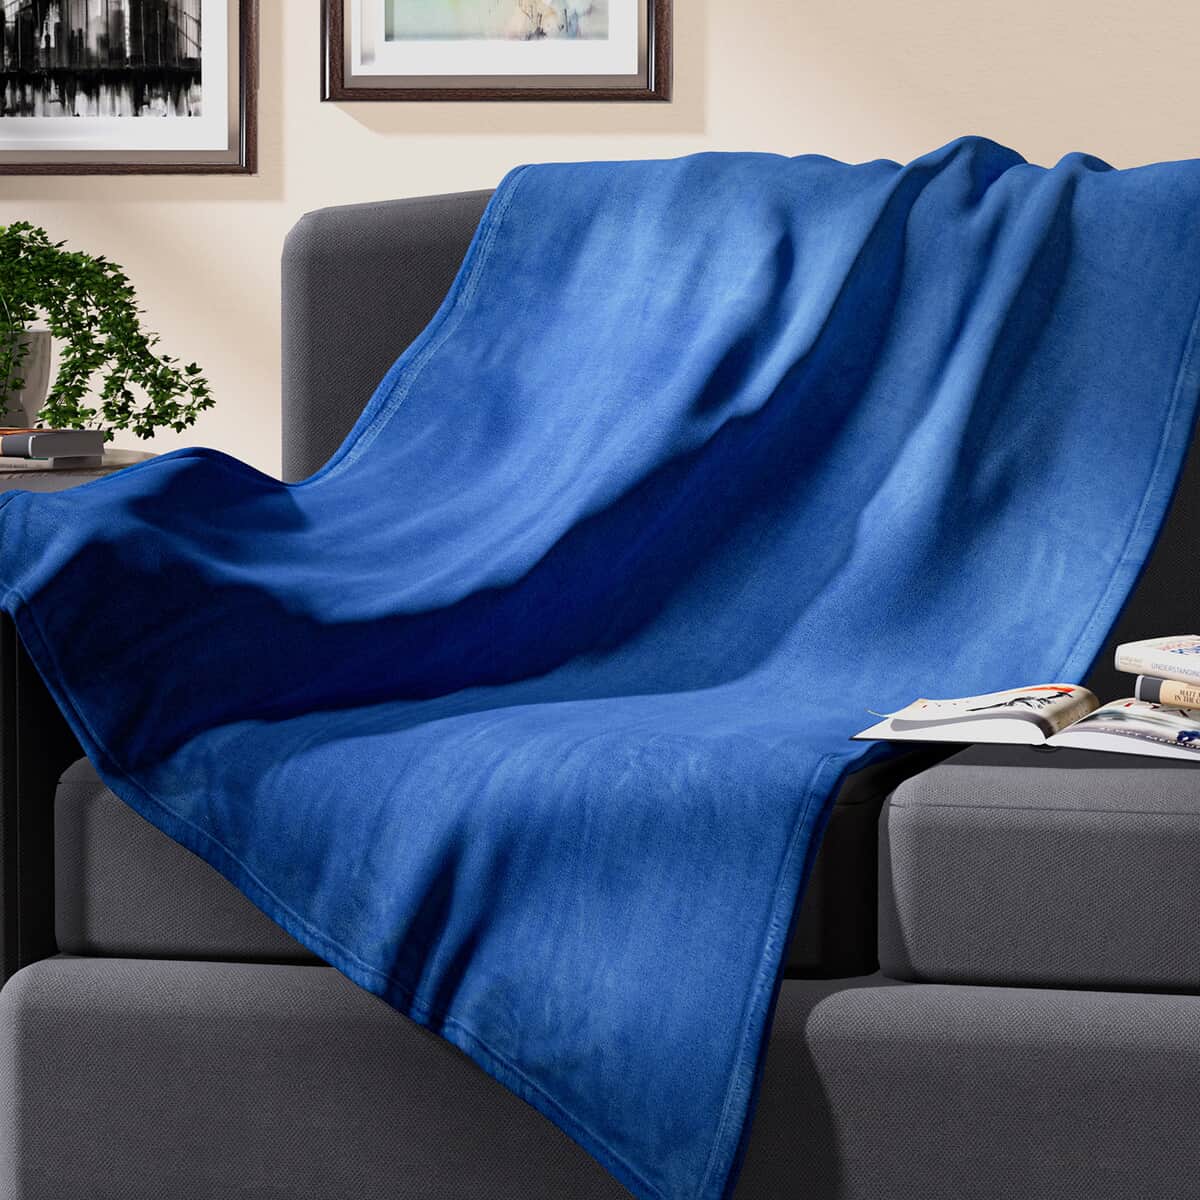 Homesmart Federal Blue Solid Coral Fleece Warmth and Soft Blanket image number 0